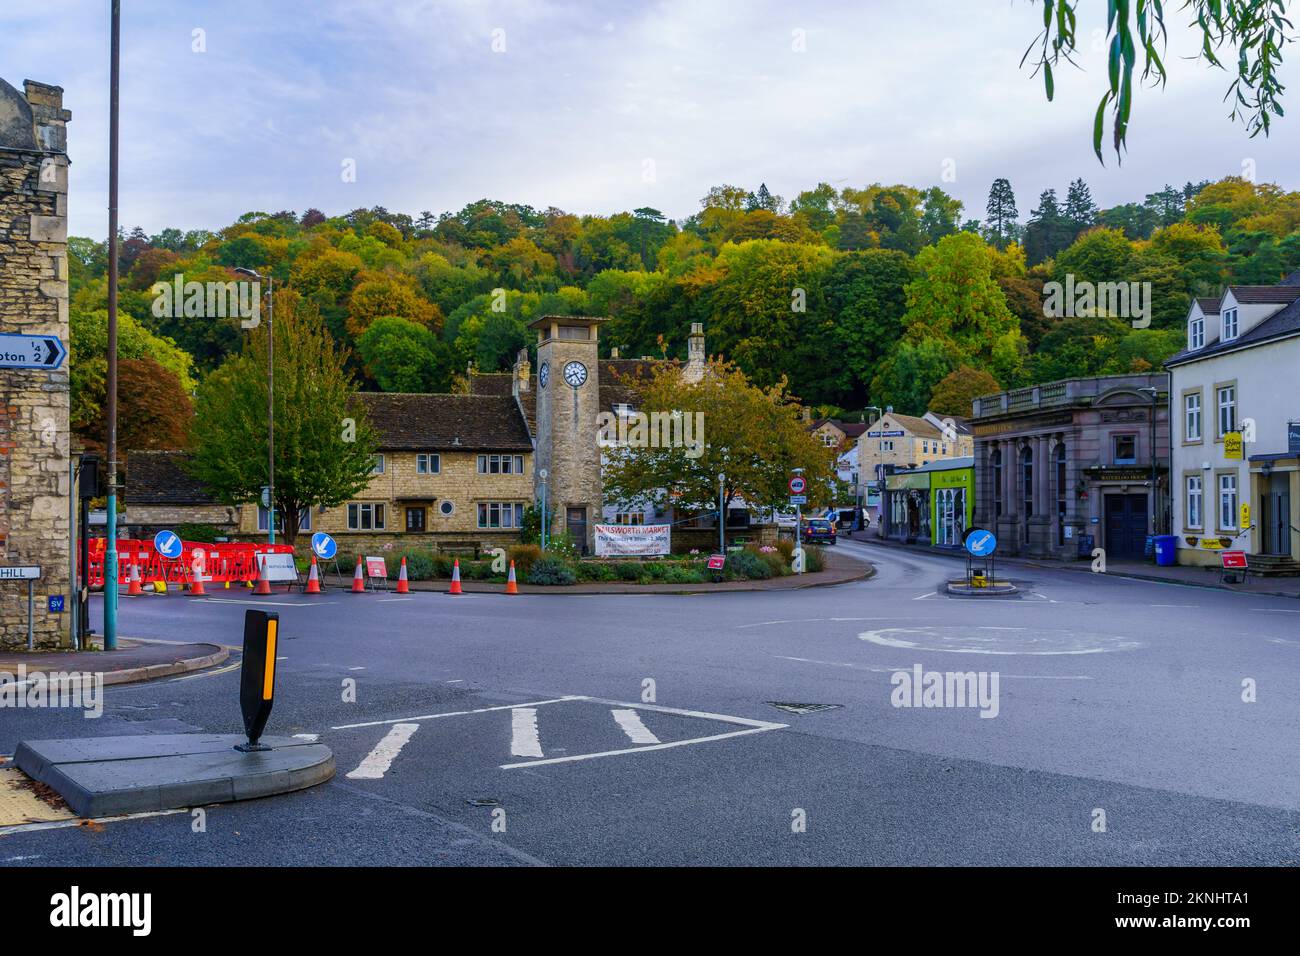 Nailsworth, UK - October 17, 2022: View of the town central square in Nailsworth, the Cotswolds region, England, UK Stock Photo